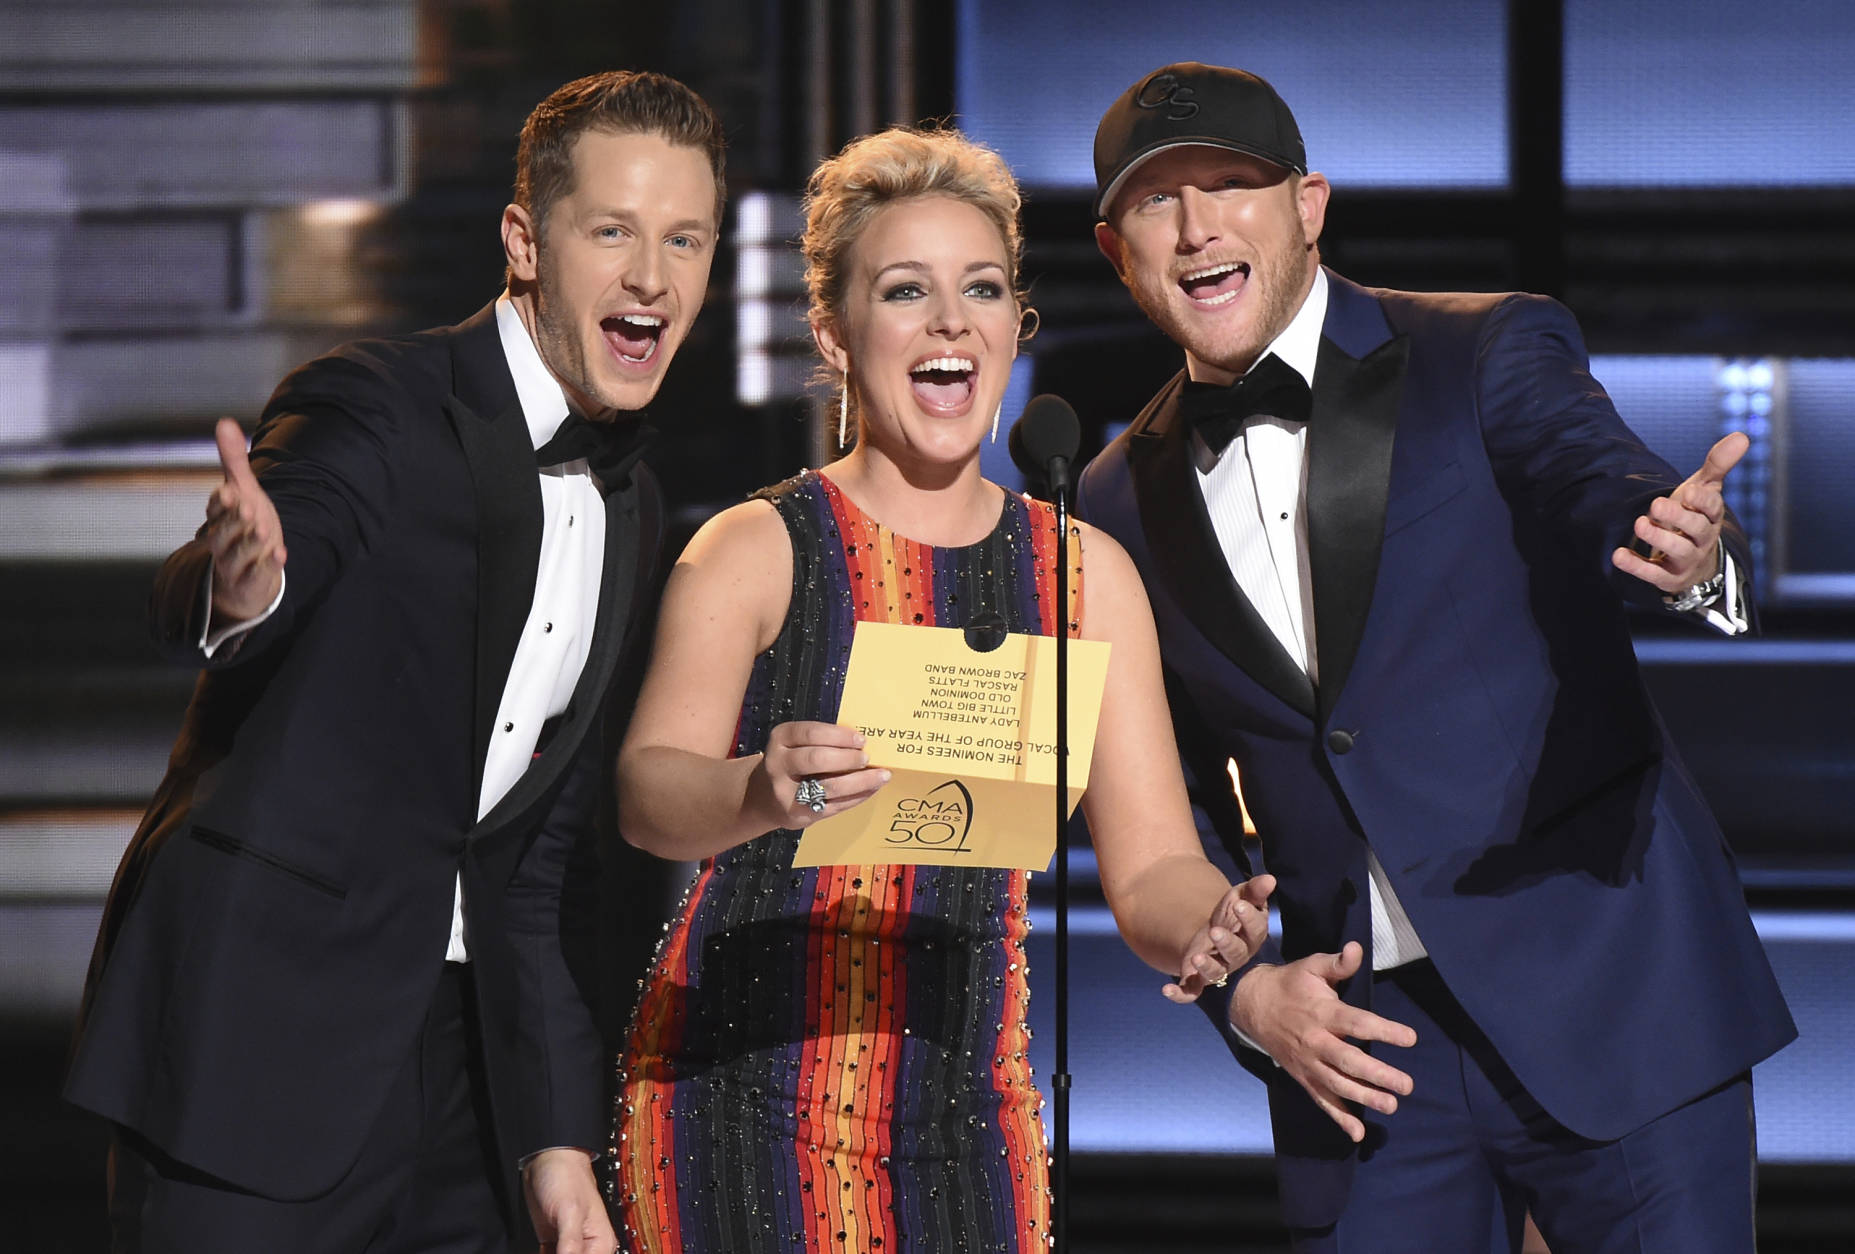 Josh Dallas, from left, Cam and Cole Swindell present the award for vocal group of the year at the 50th annual CMA Awards at the Bridgestone Arena on Wednesday, Nov. 2, 2016, in Nashville, Tenn. (Photo by Charles Sykes/Invision/AP)